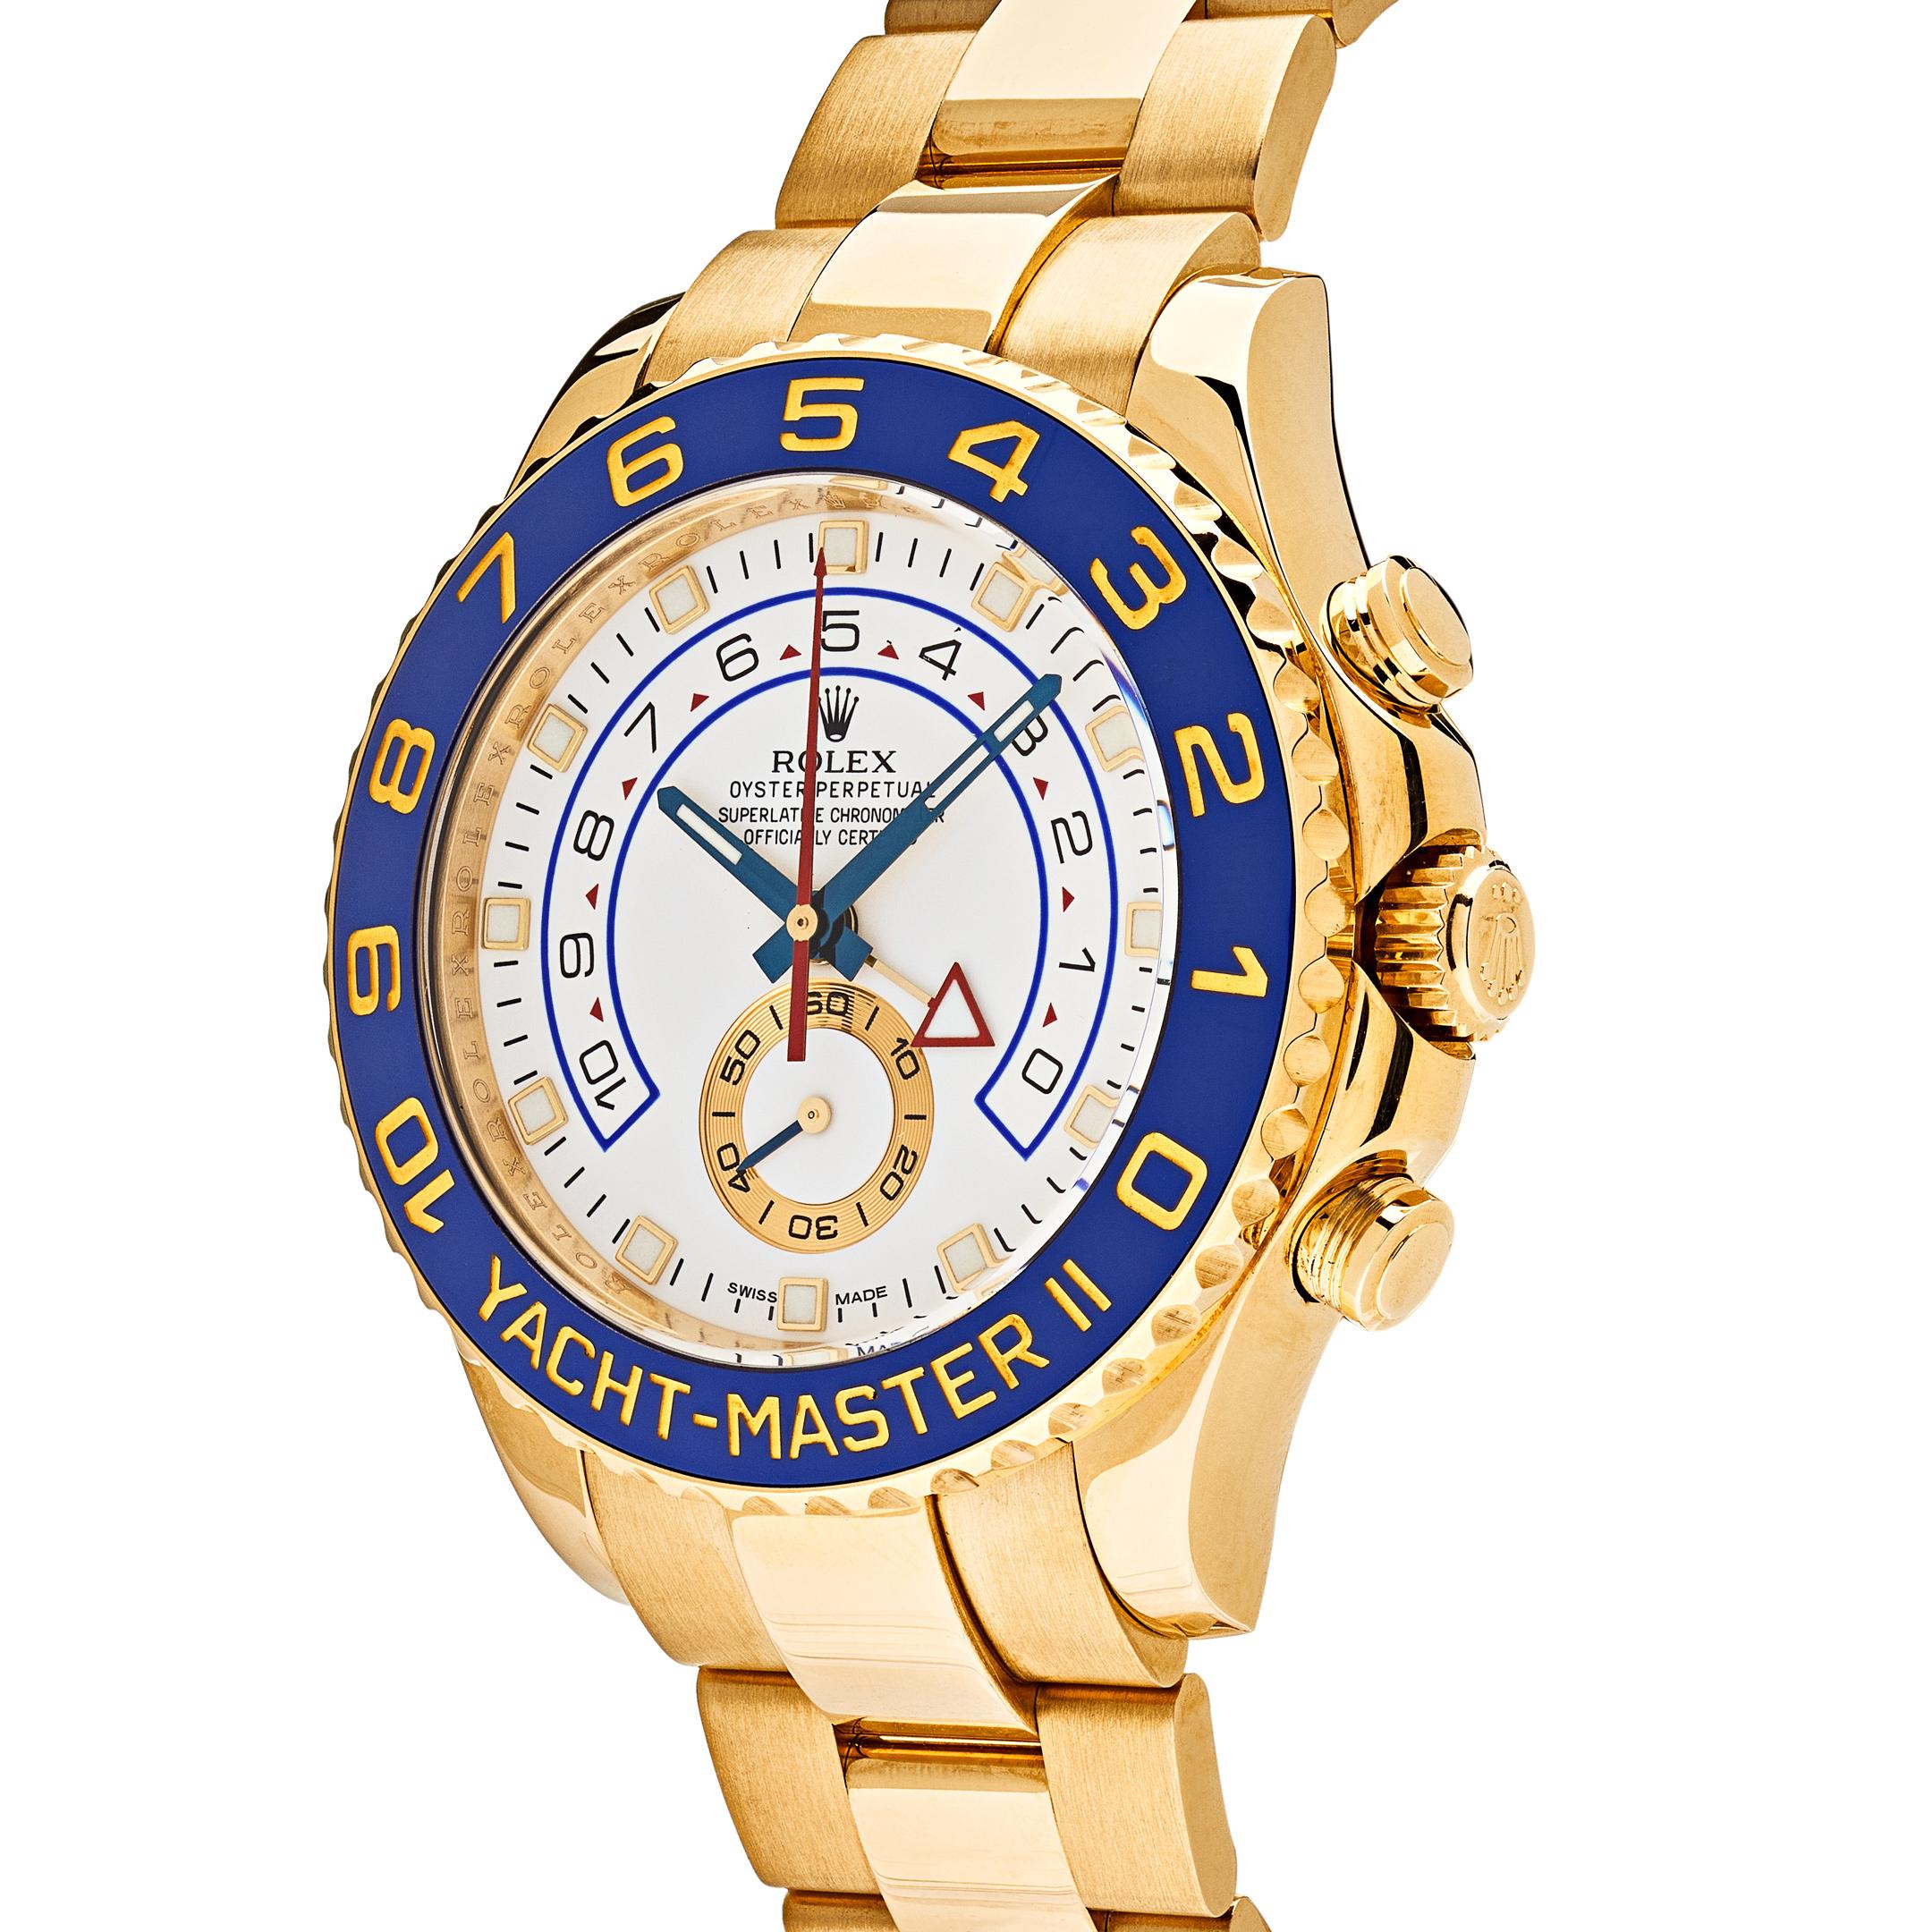 This Rolex Yacht-Master II is designed in a 44mm 18K yellow gold case. It features a white dial with gold illuminating hands and index hour markers. The bracelet is crafted in 18K yellow gold with a fold-over clasp with safety.
 
*This watch has